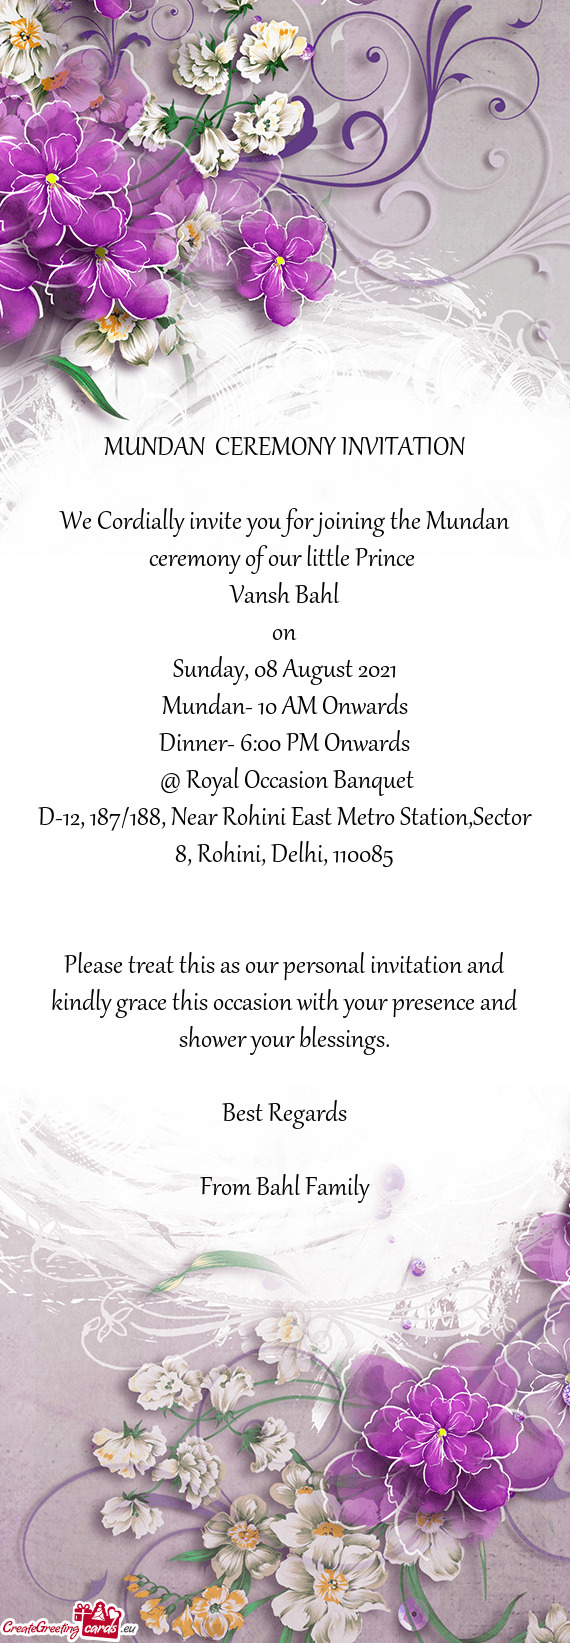 We Cordially invite you for joining the Mundan ceremony of our little Prince